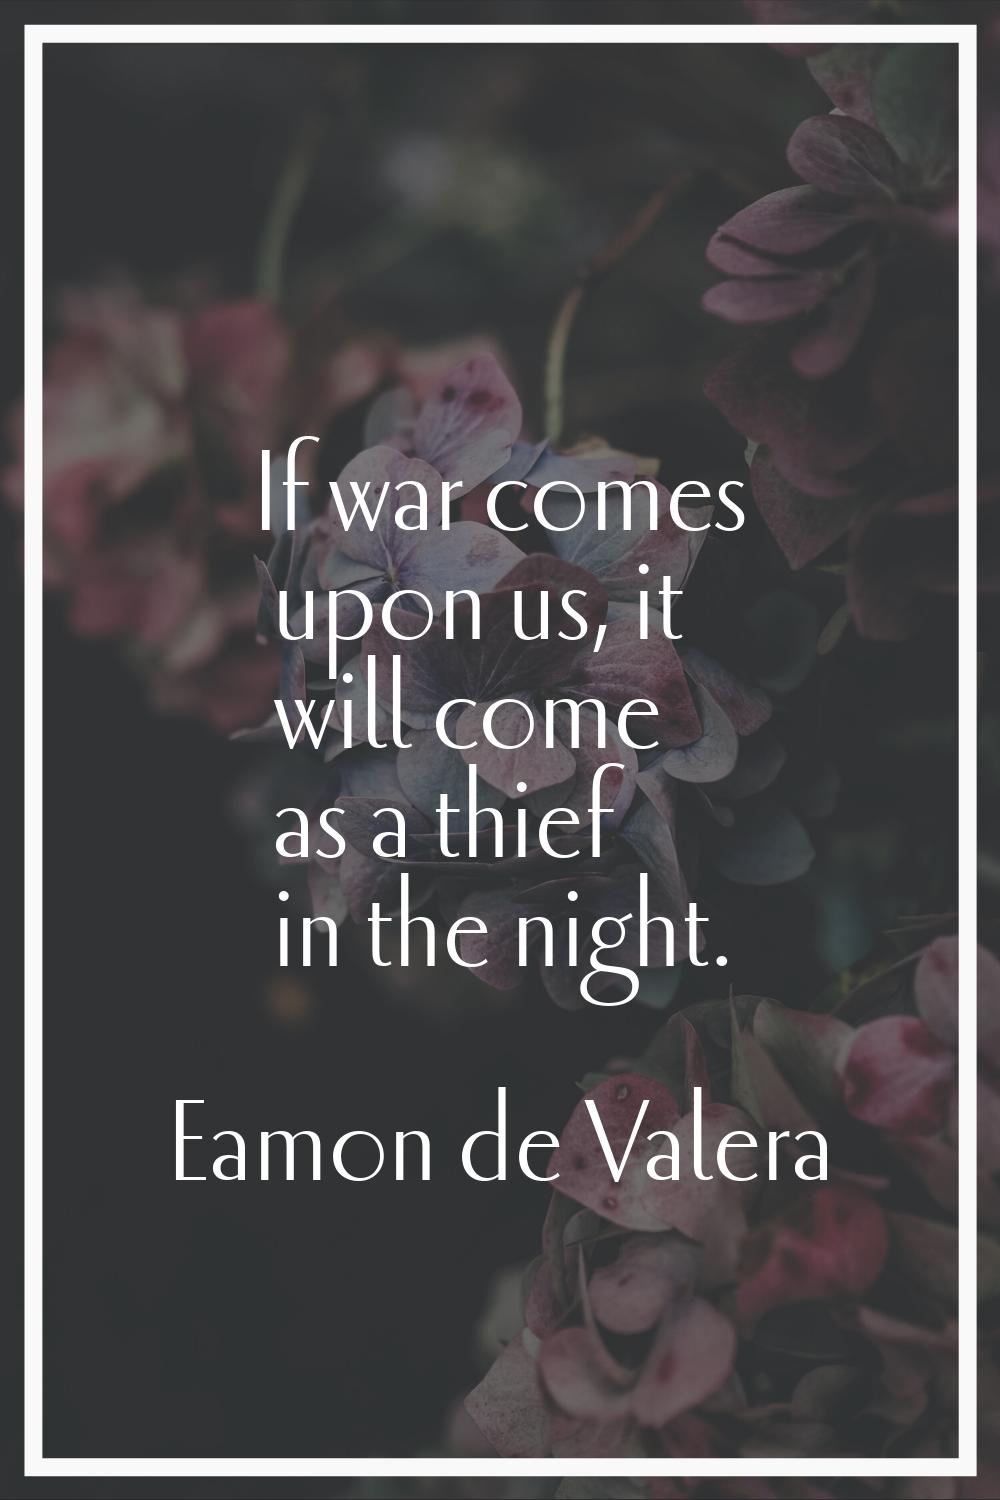 If war comes upon us, it will come as a thief in the night.